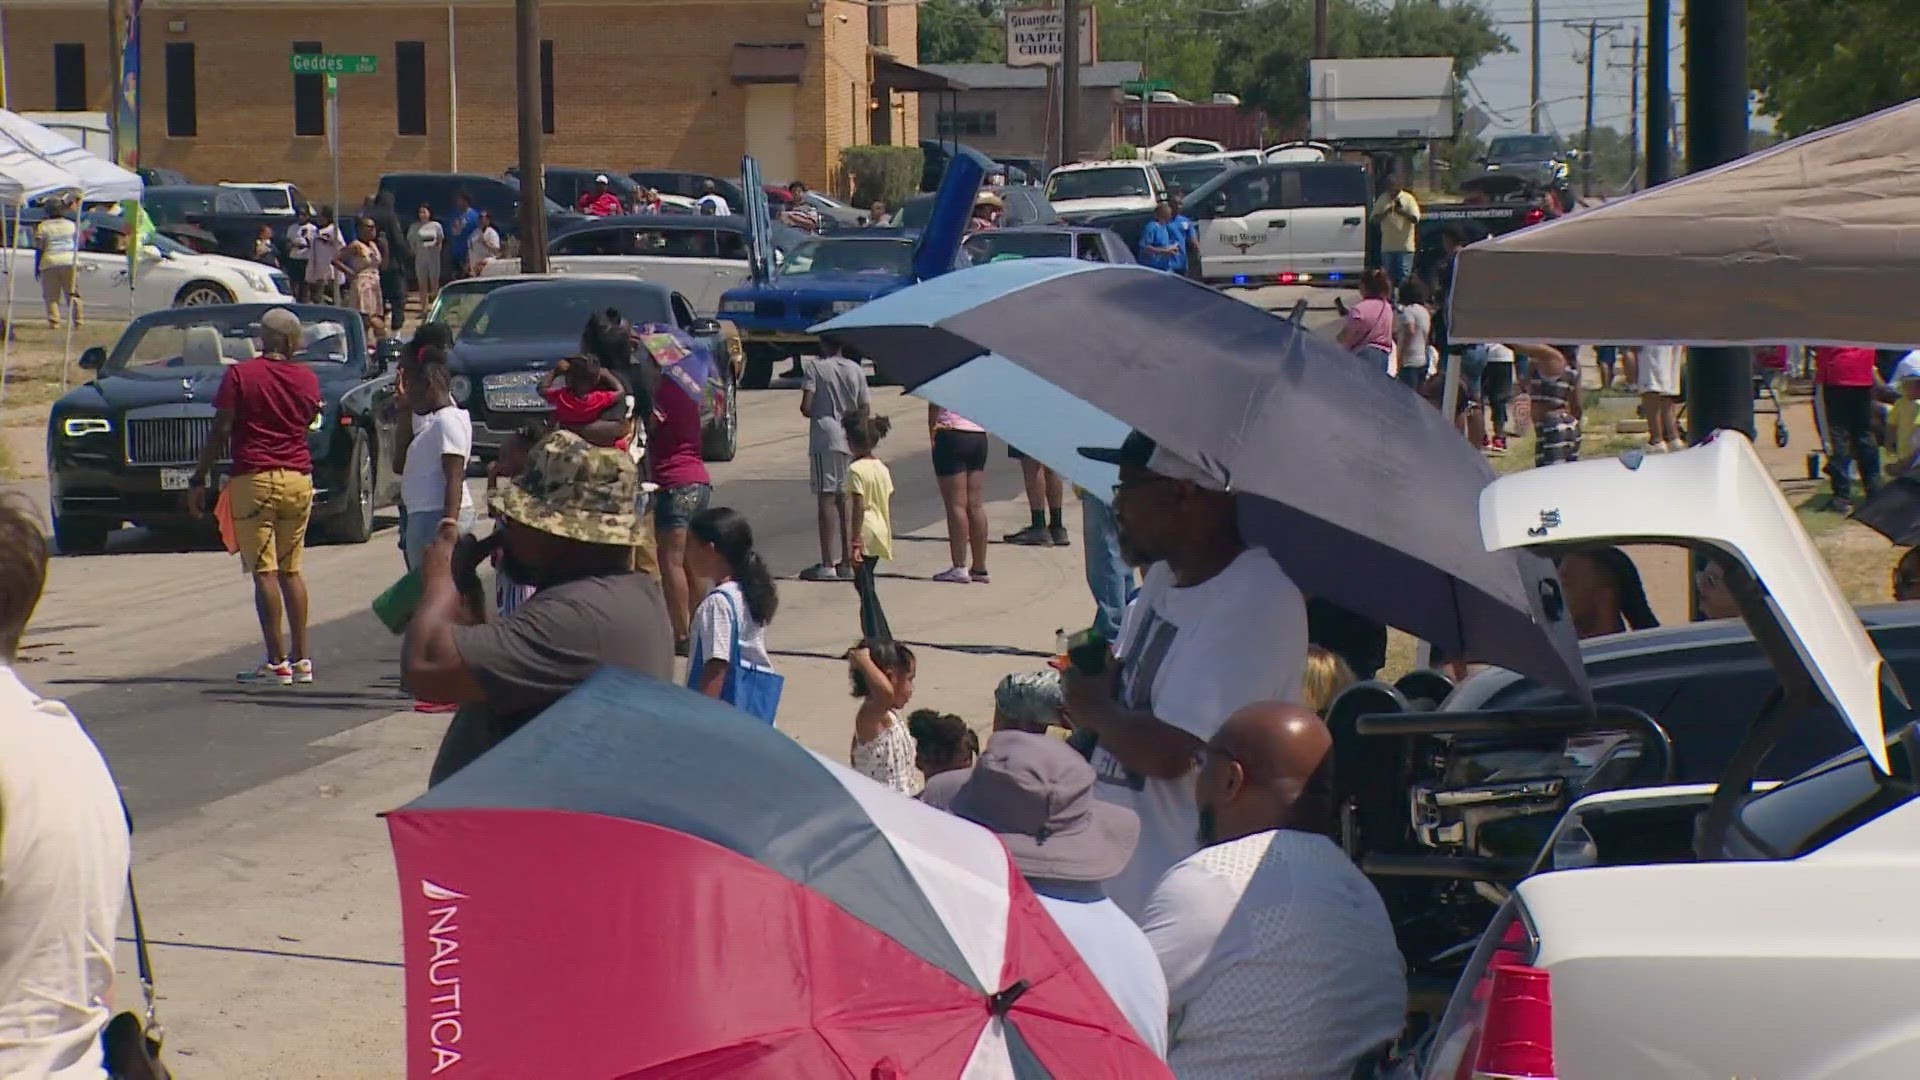 Hundreds of people lined Horne Street in Fort Worth Tuesday to celebrate Independence Day, continuing a decades-old tradition.